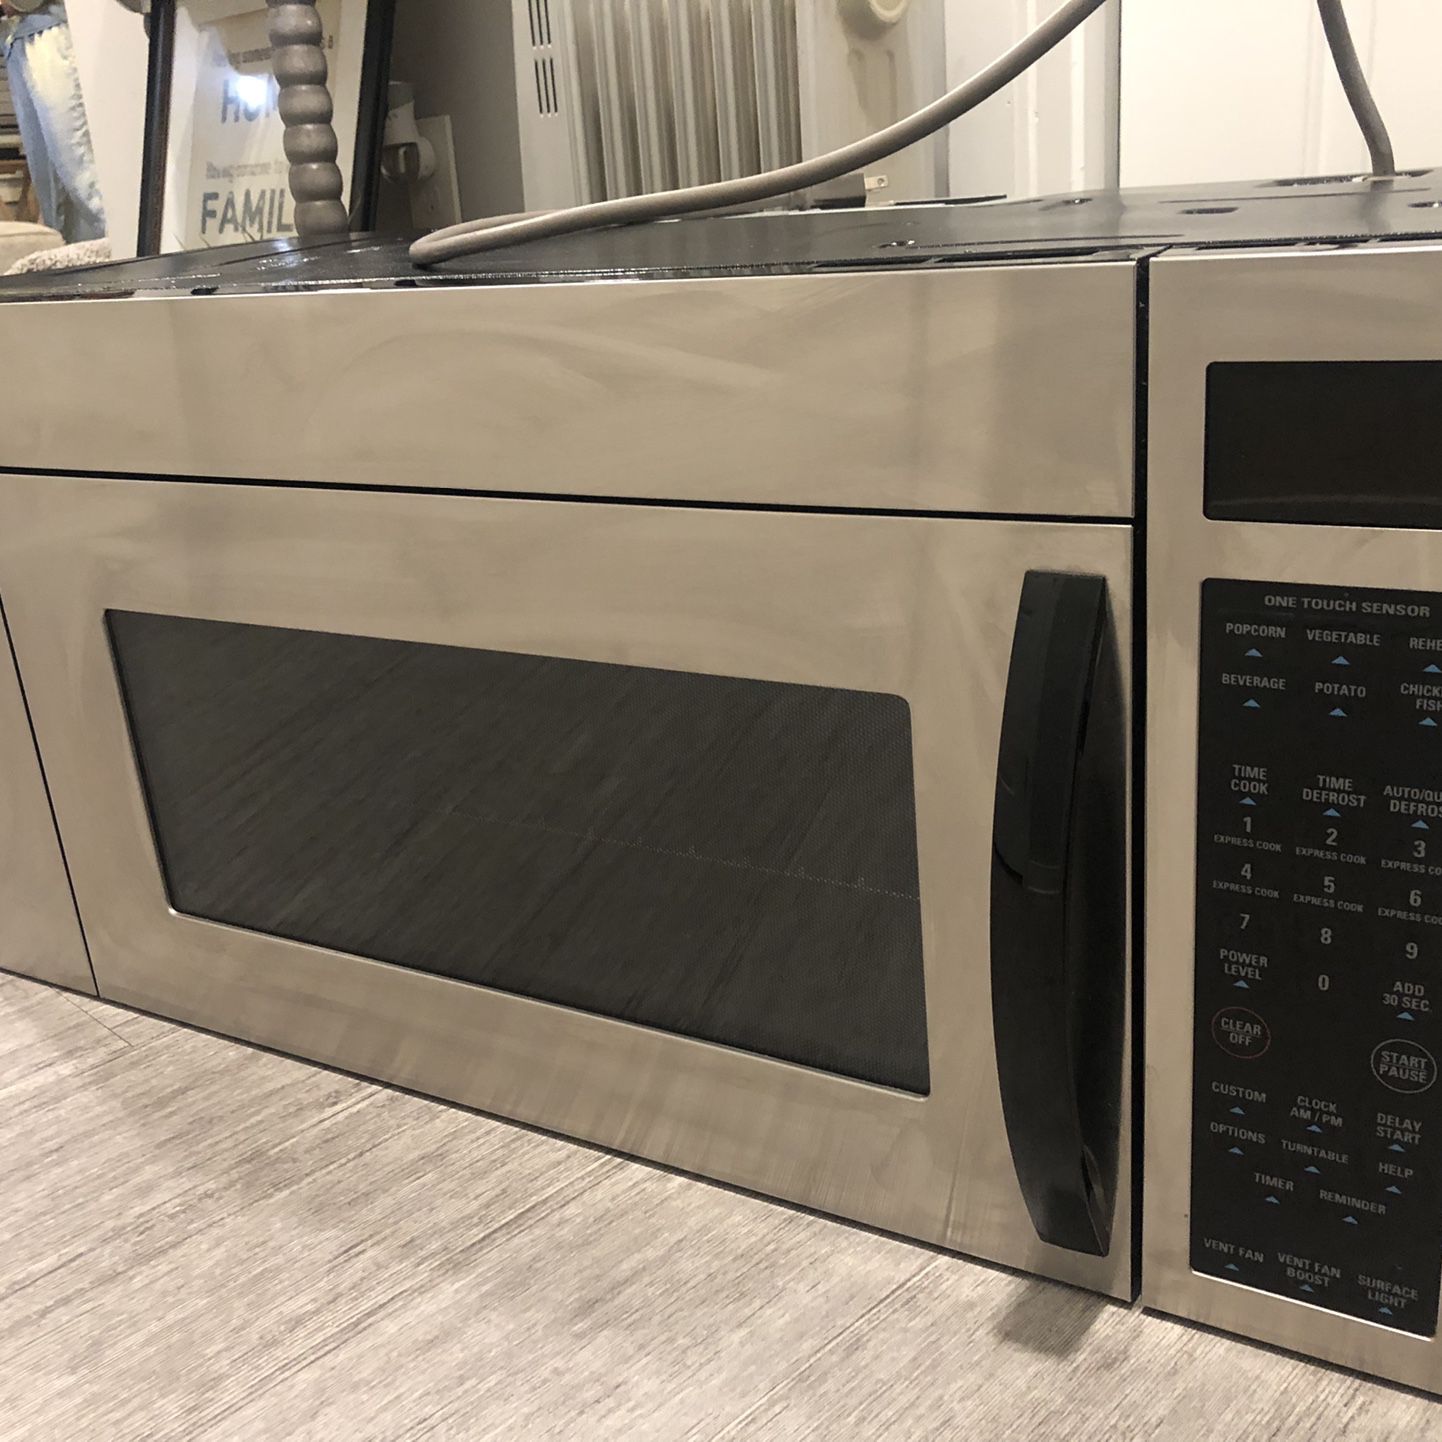 New Microwave for Sale in Newberg, OR - OfferUp